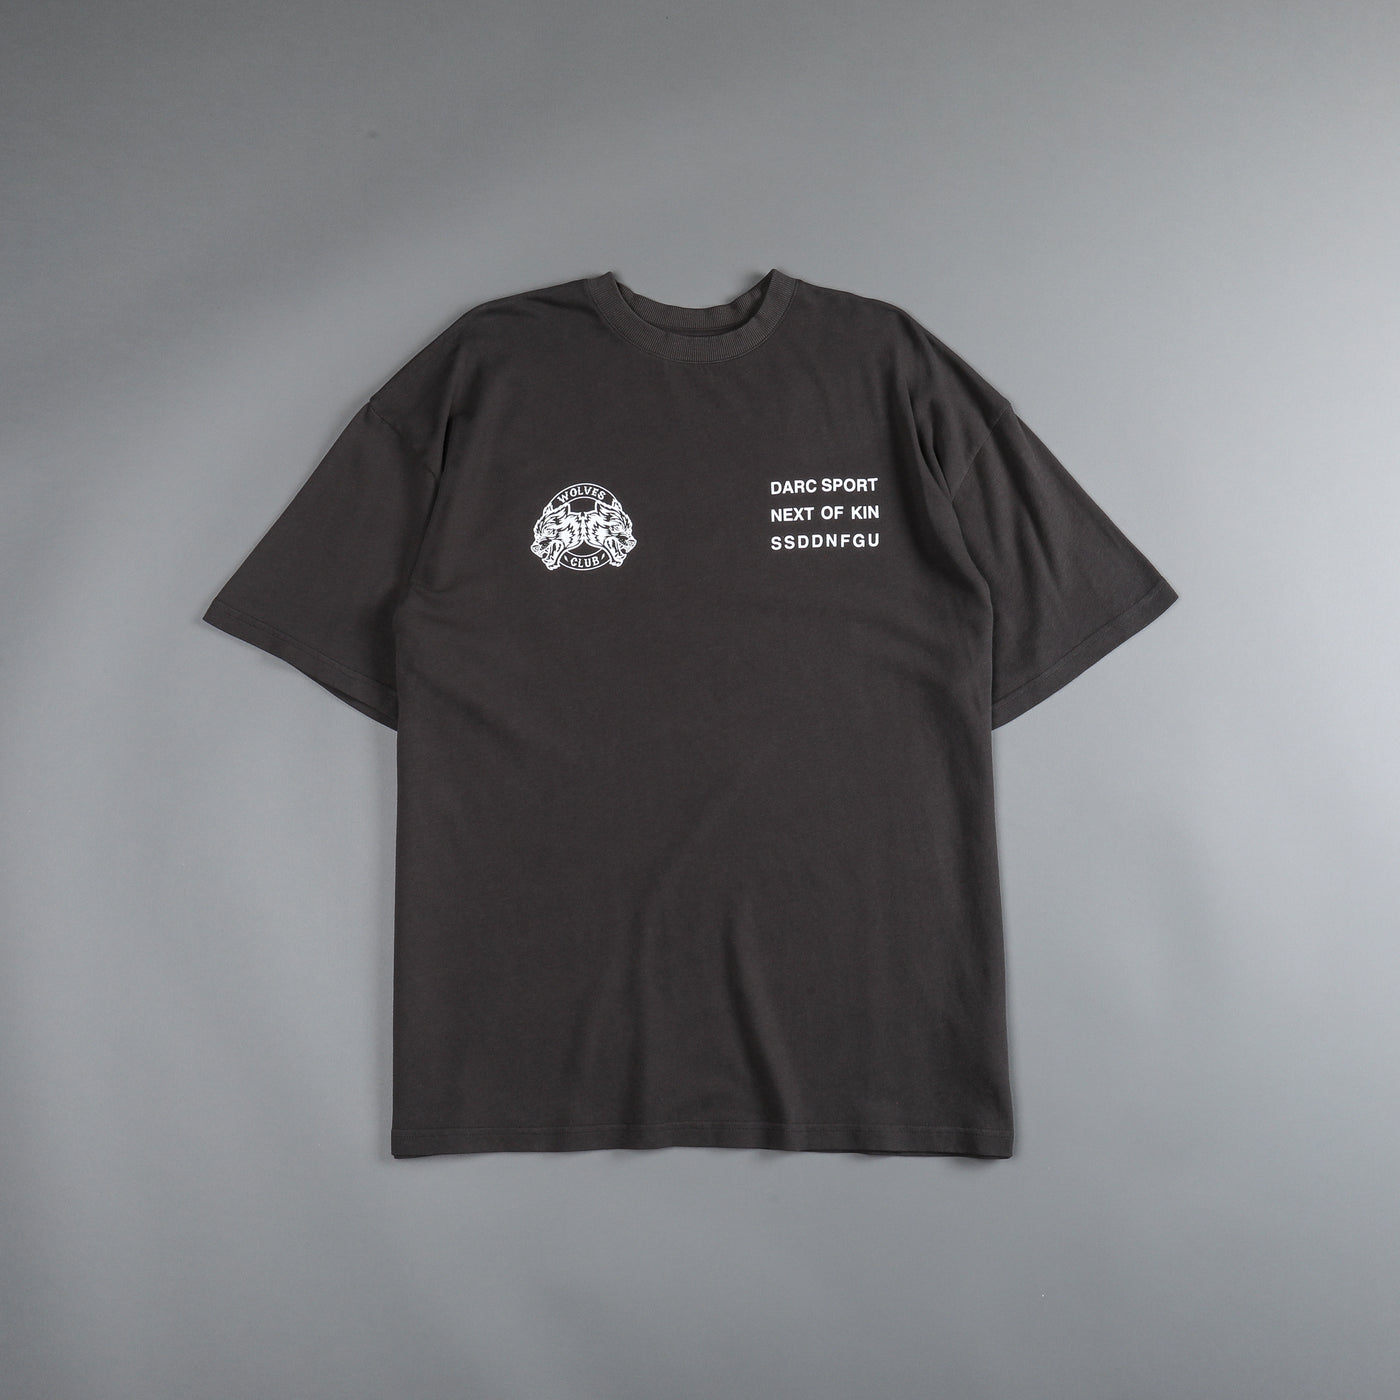 All For One Premium "Oversized" Tee in Wolf Gray/Light Mauve